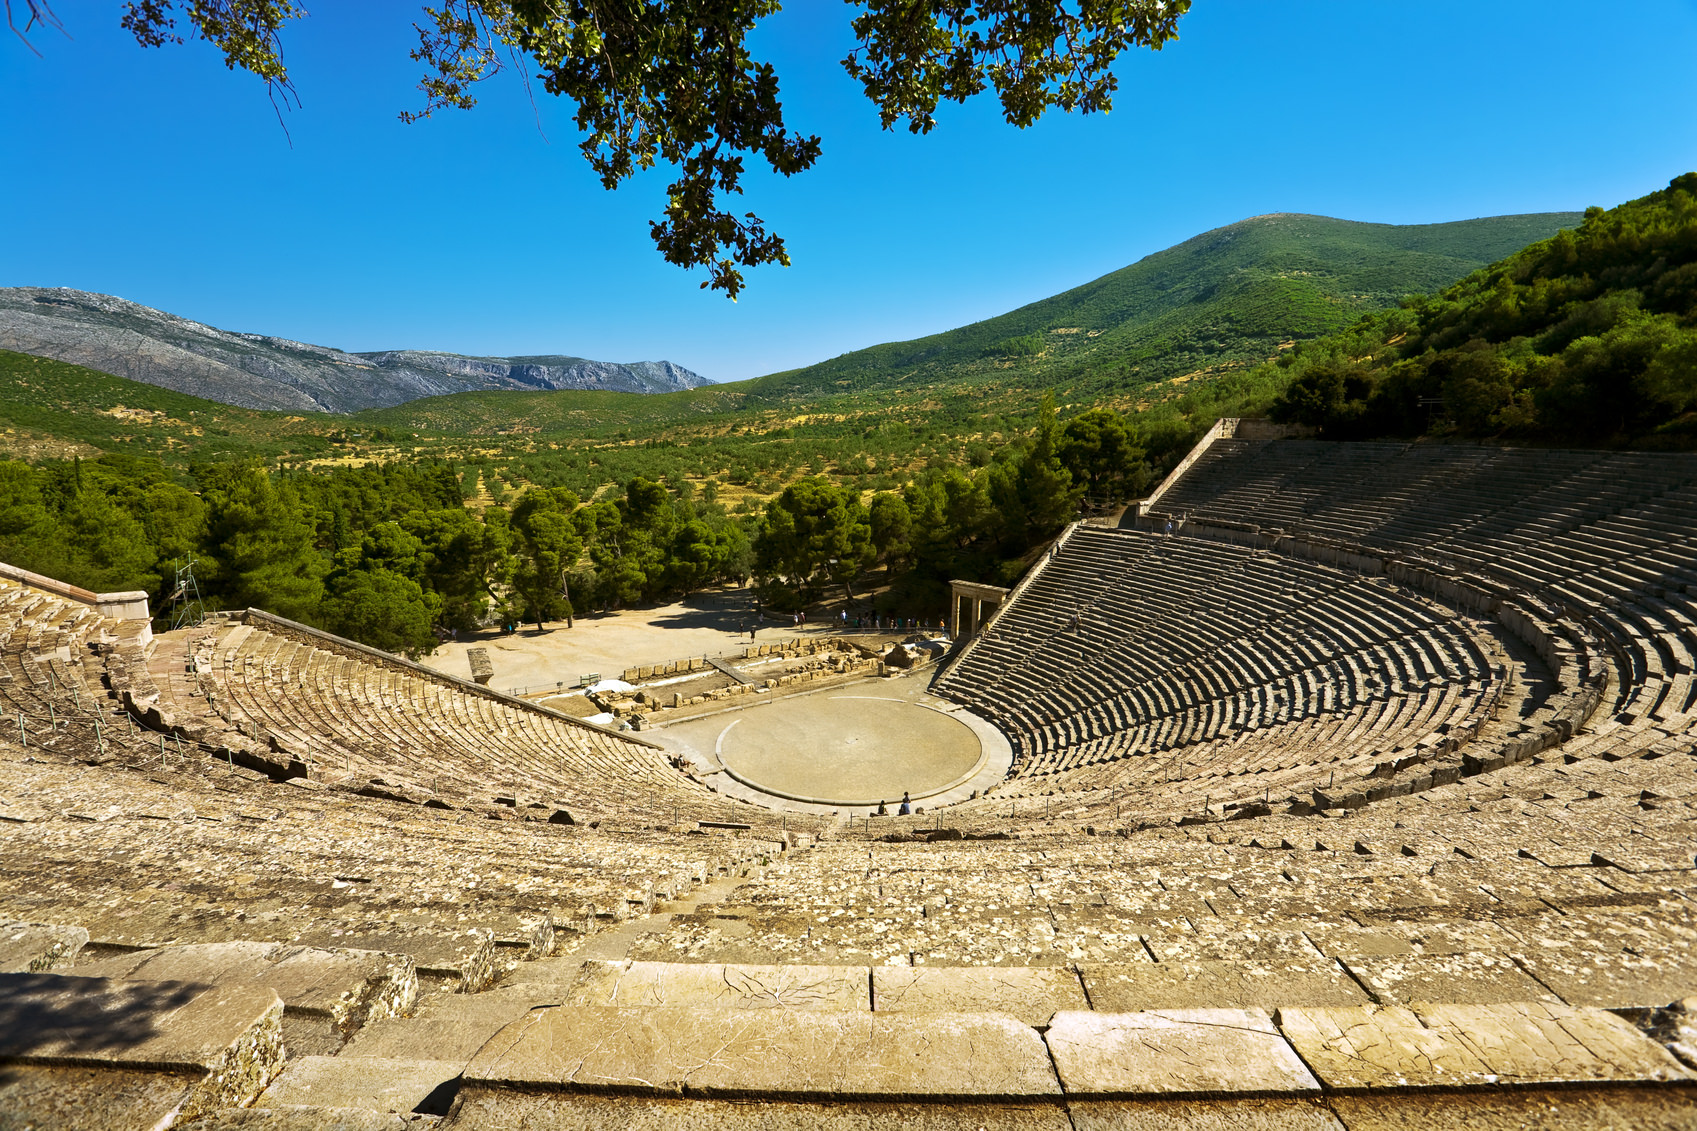 Epidaurus theatres come alive with the works of great Greek playwrights such as Aeschylus, Euripides, Sophocles and more